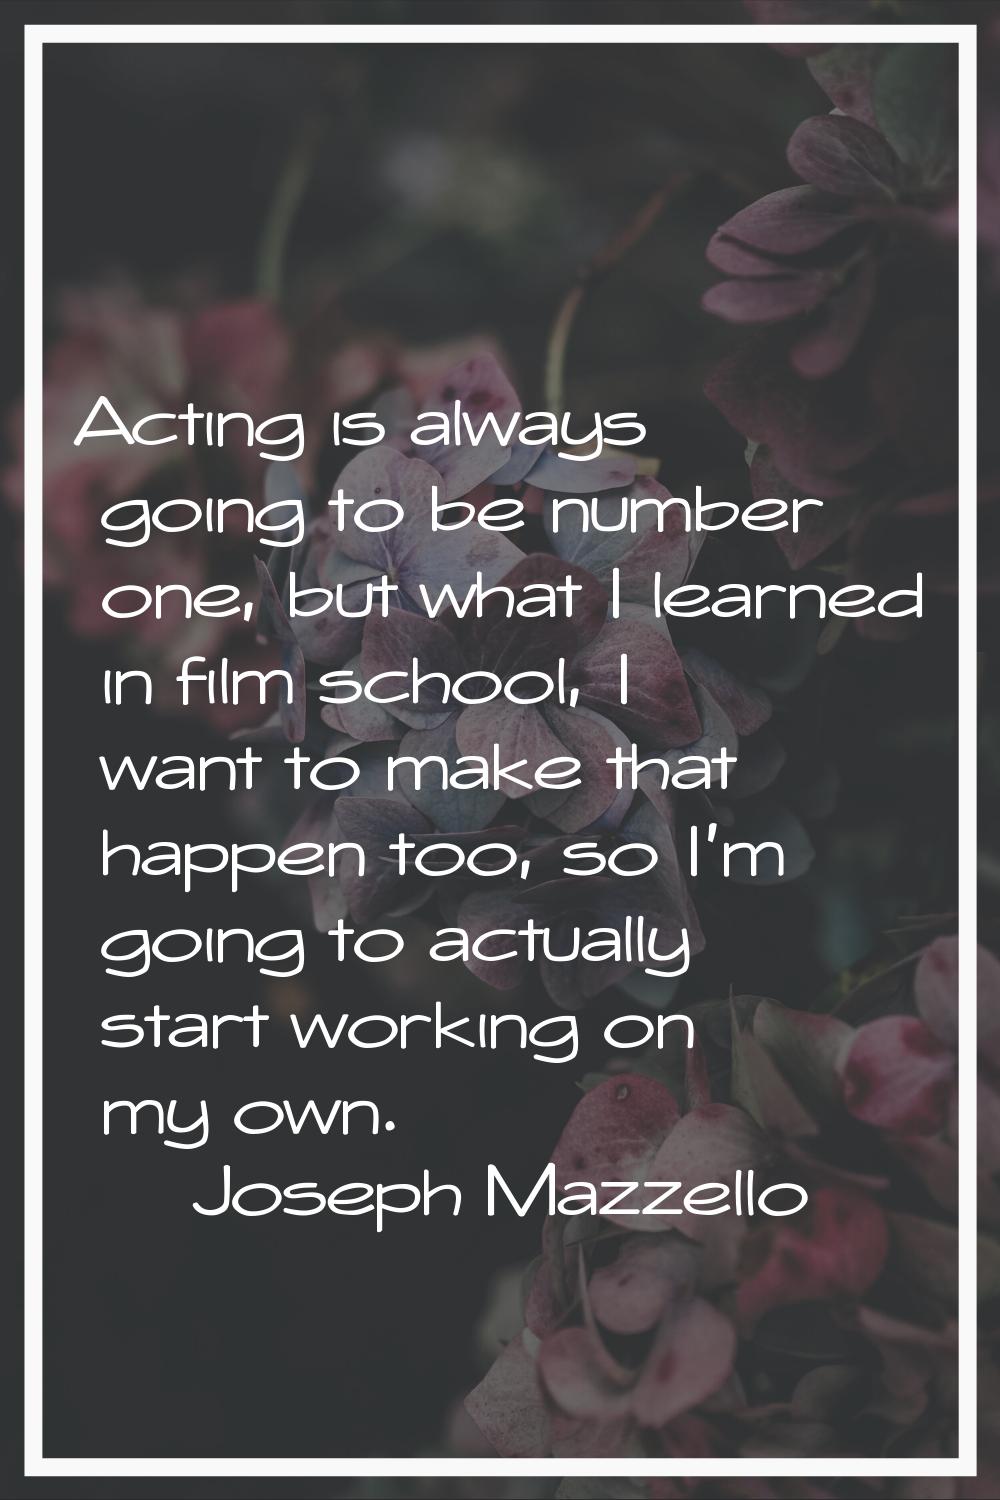 Acting is always going to be number one, but what I learned in film school, I want to make that hap